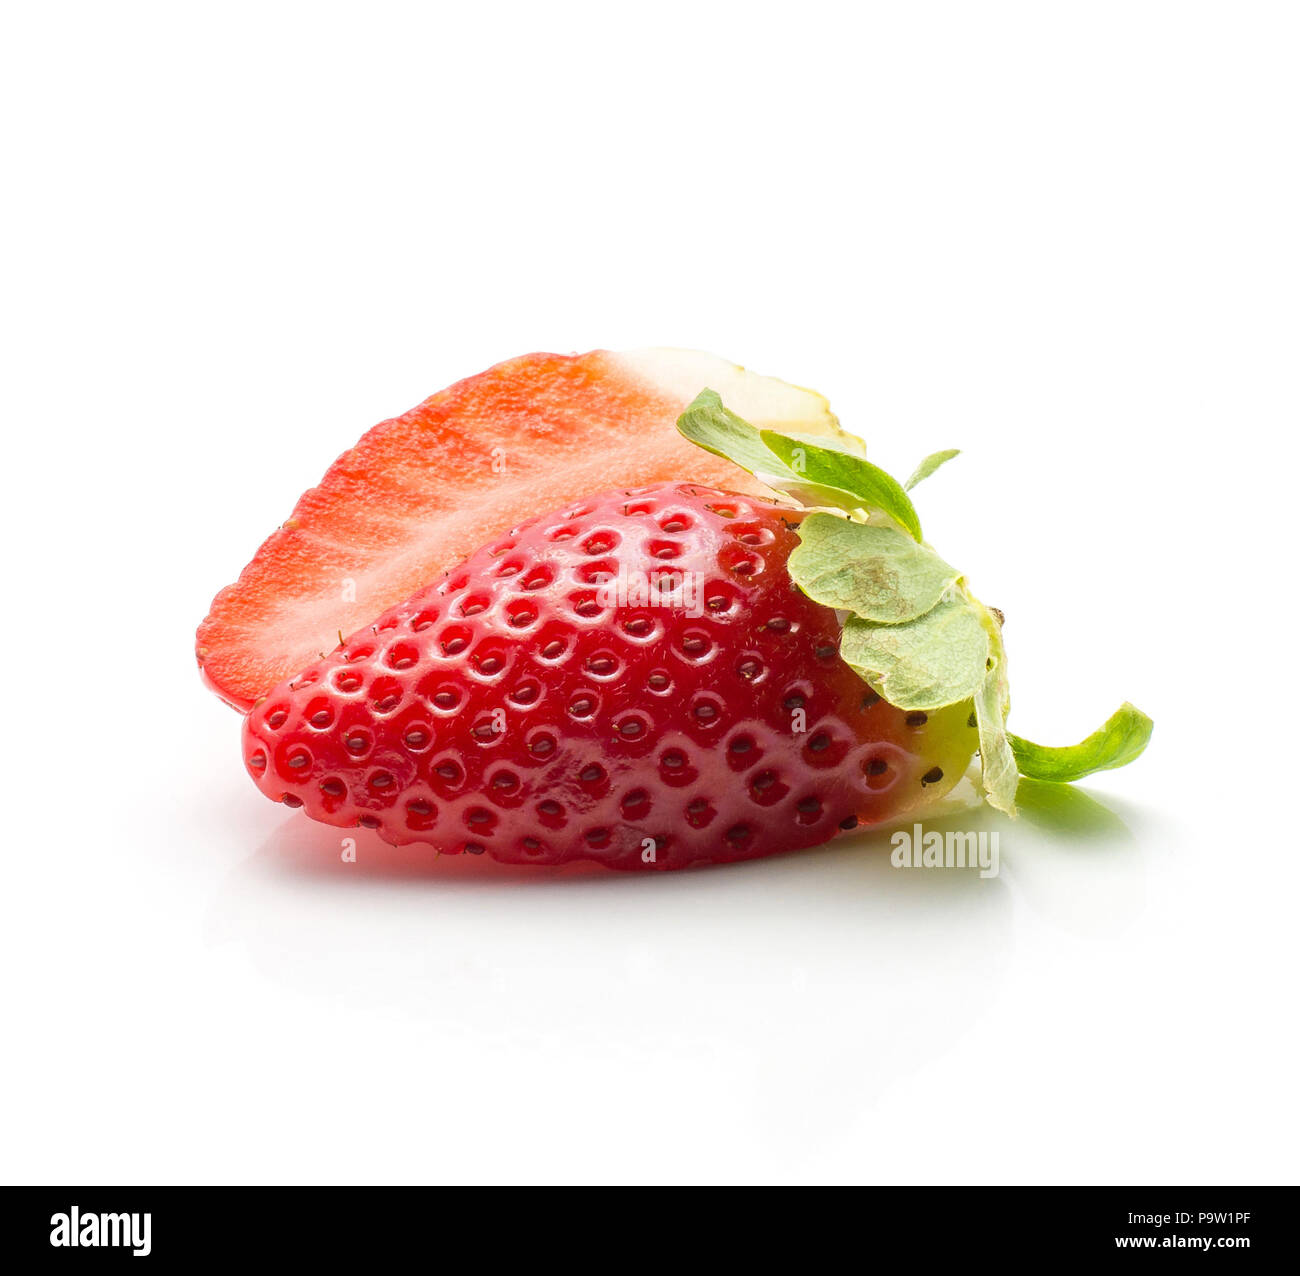 Sliced garden strawberry isolated on white background two halves Stock Photo